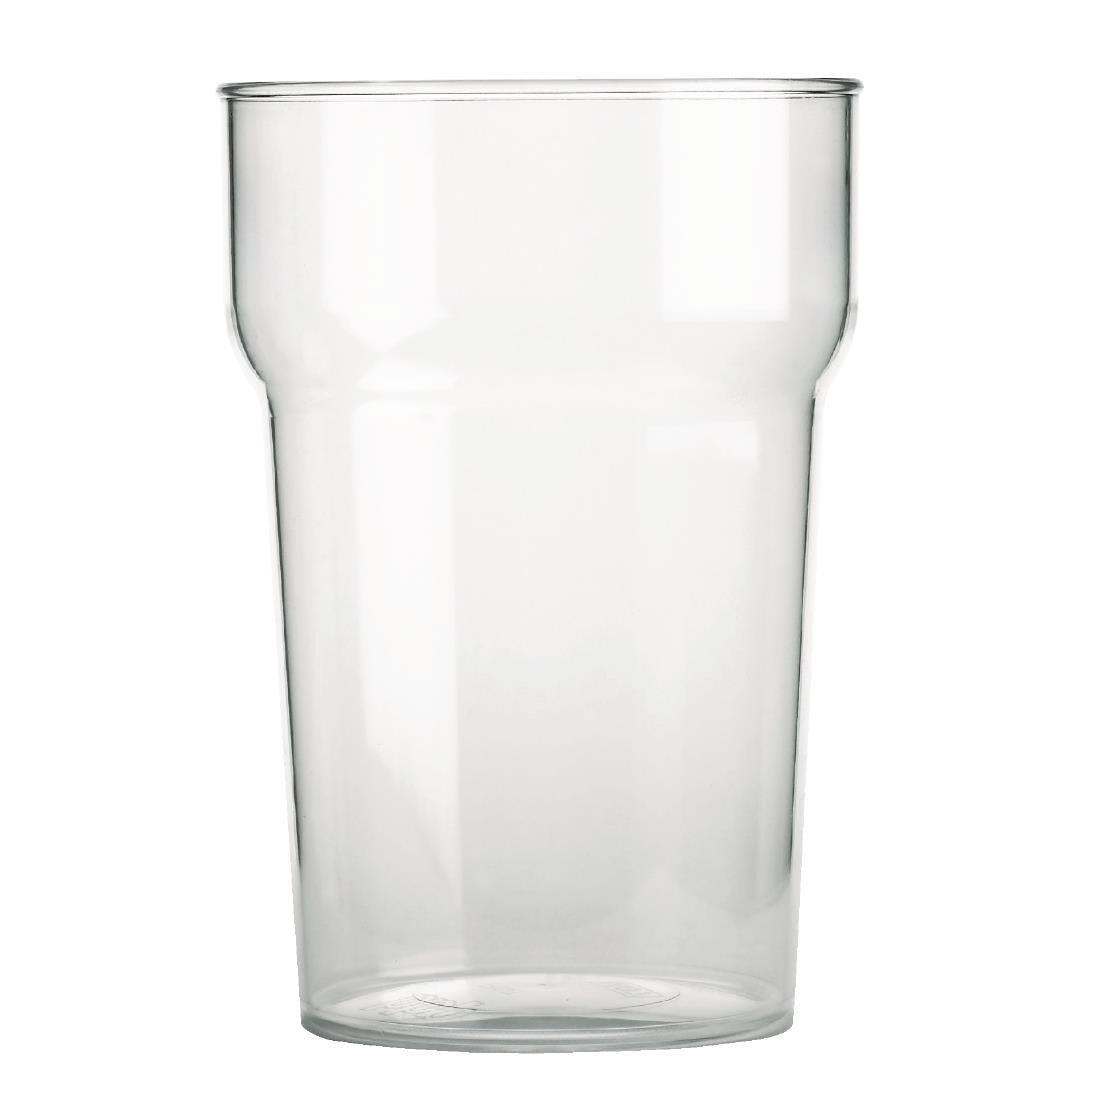 BBP Polycarbonate Nonic Pint Glasses 570ml CE Marked (Pack of 48)